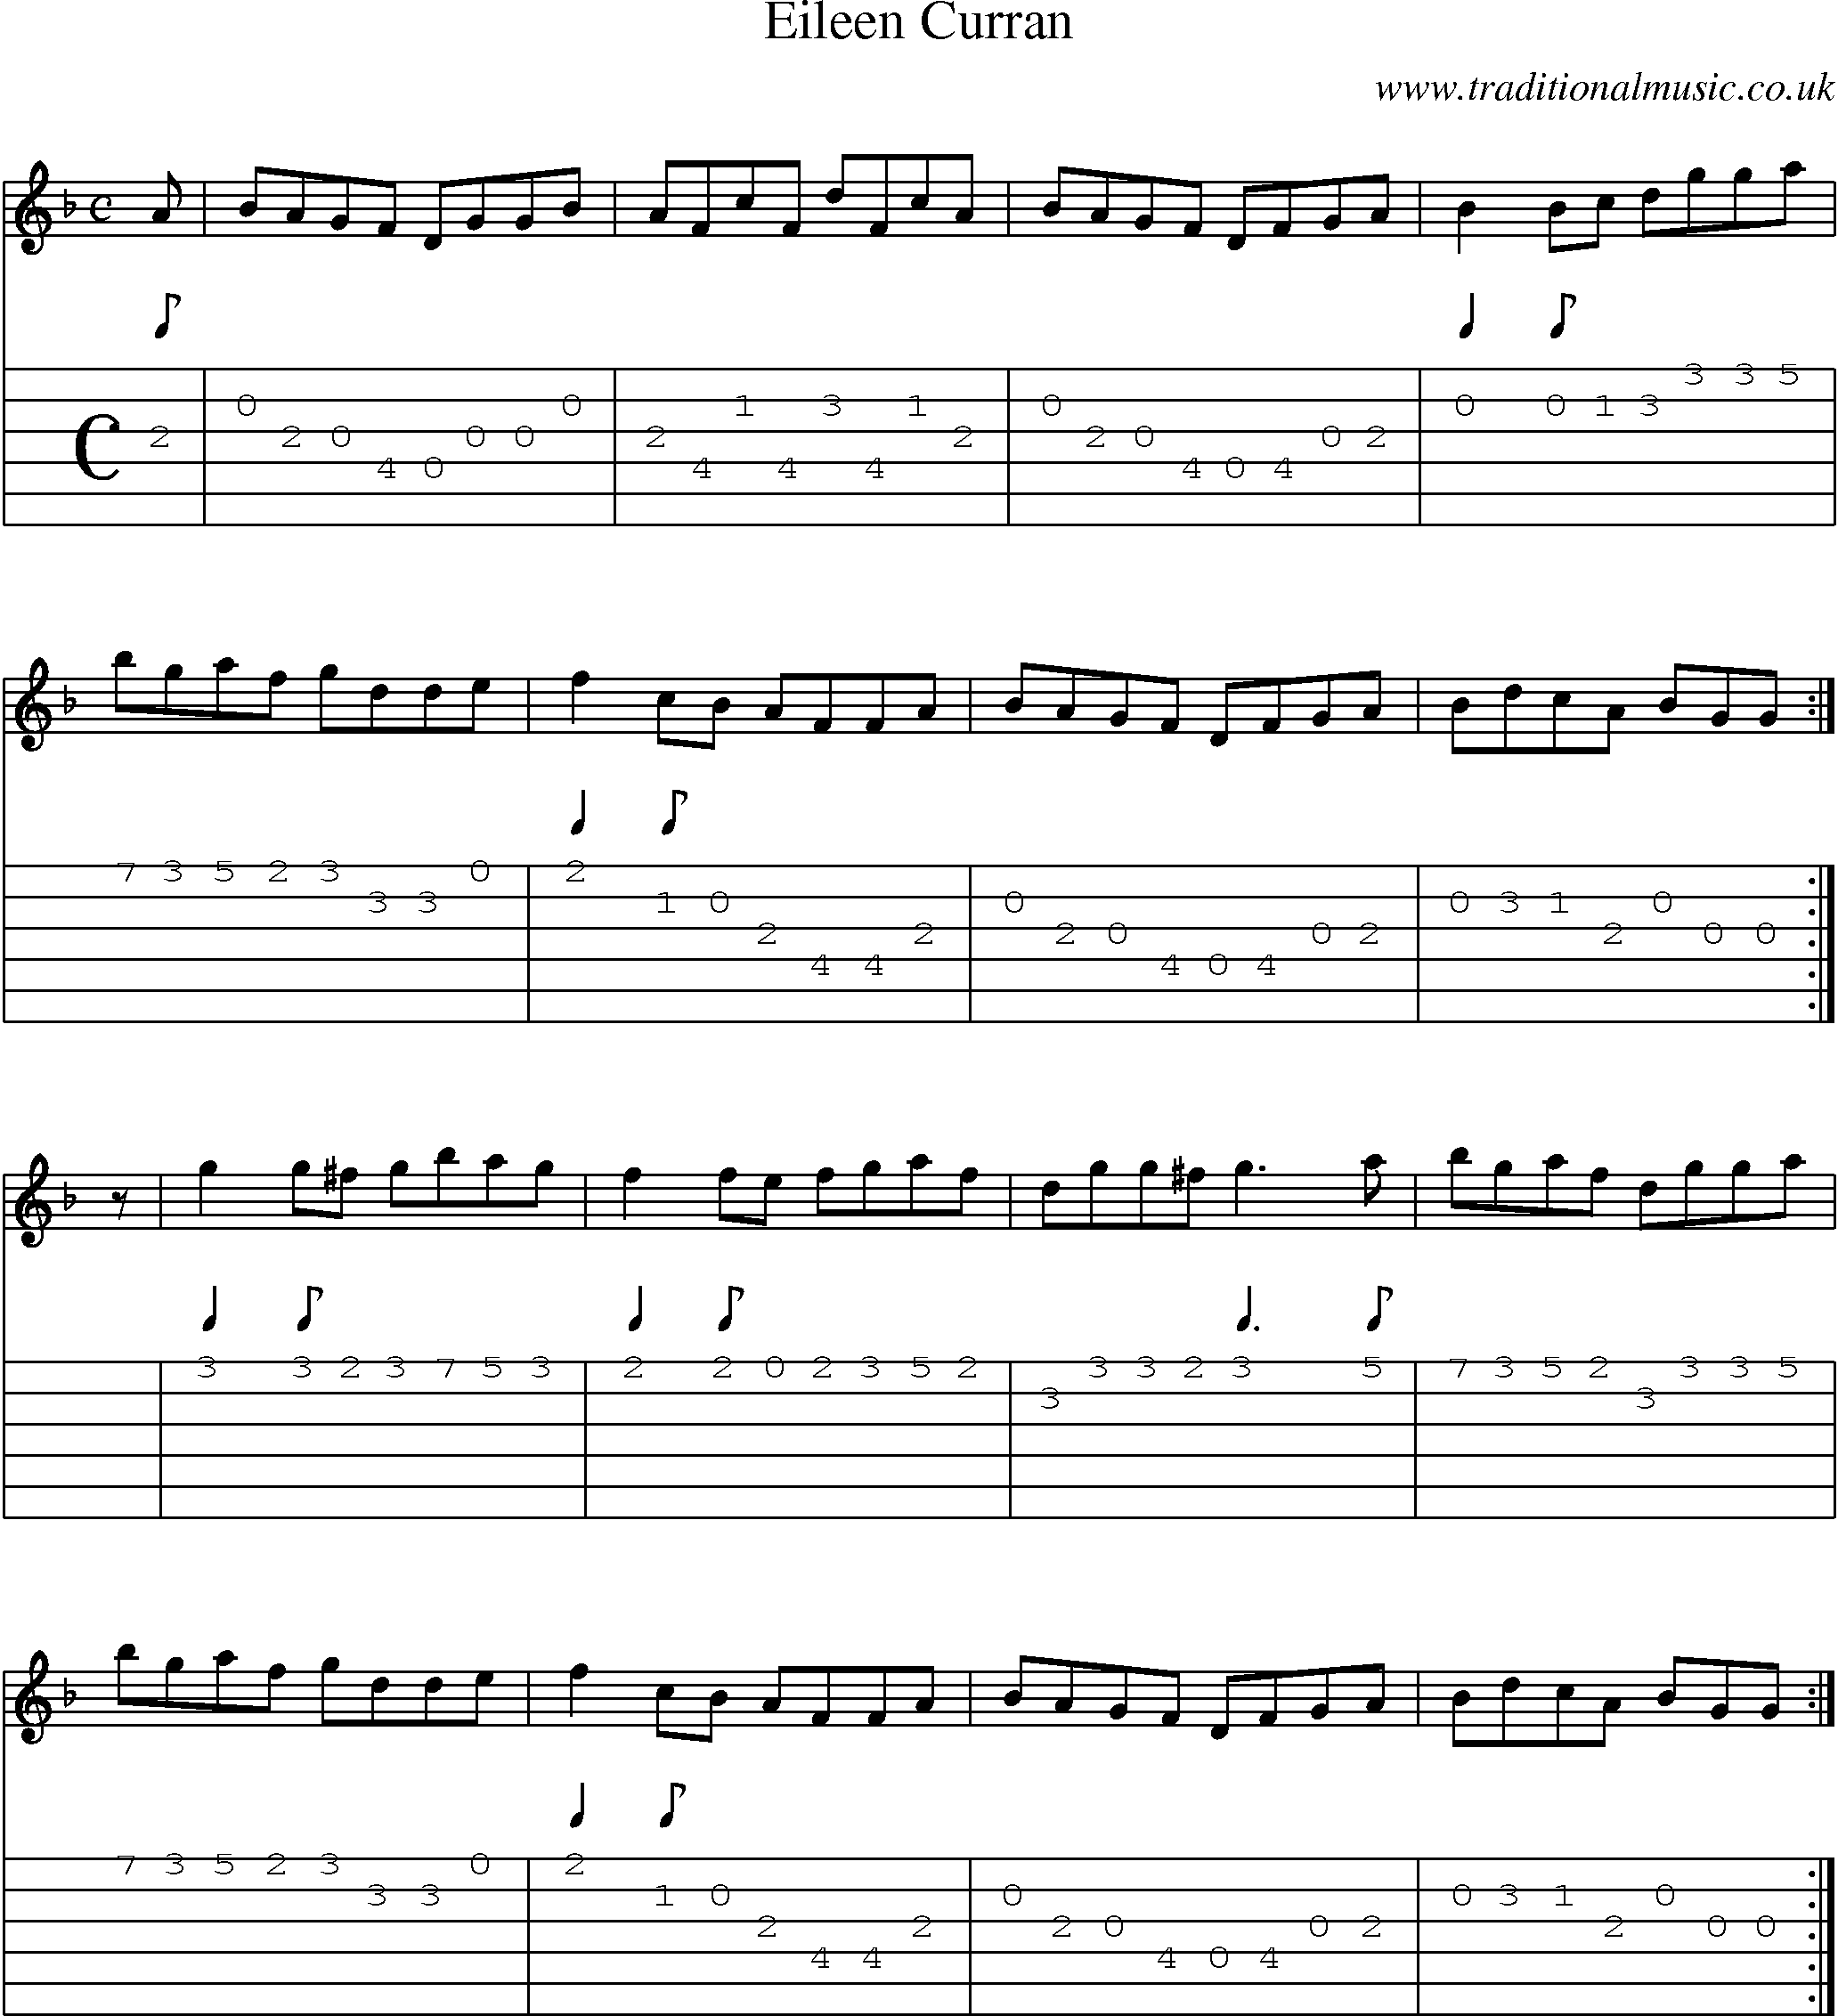 Music Score and Guitar Tabs for Eileen Curran